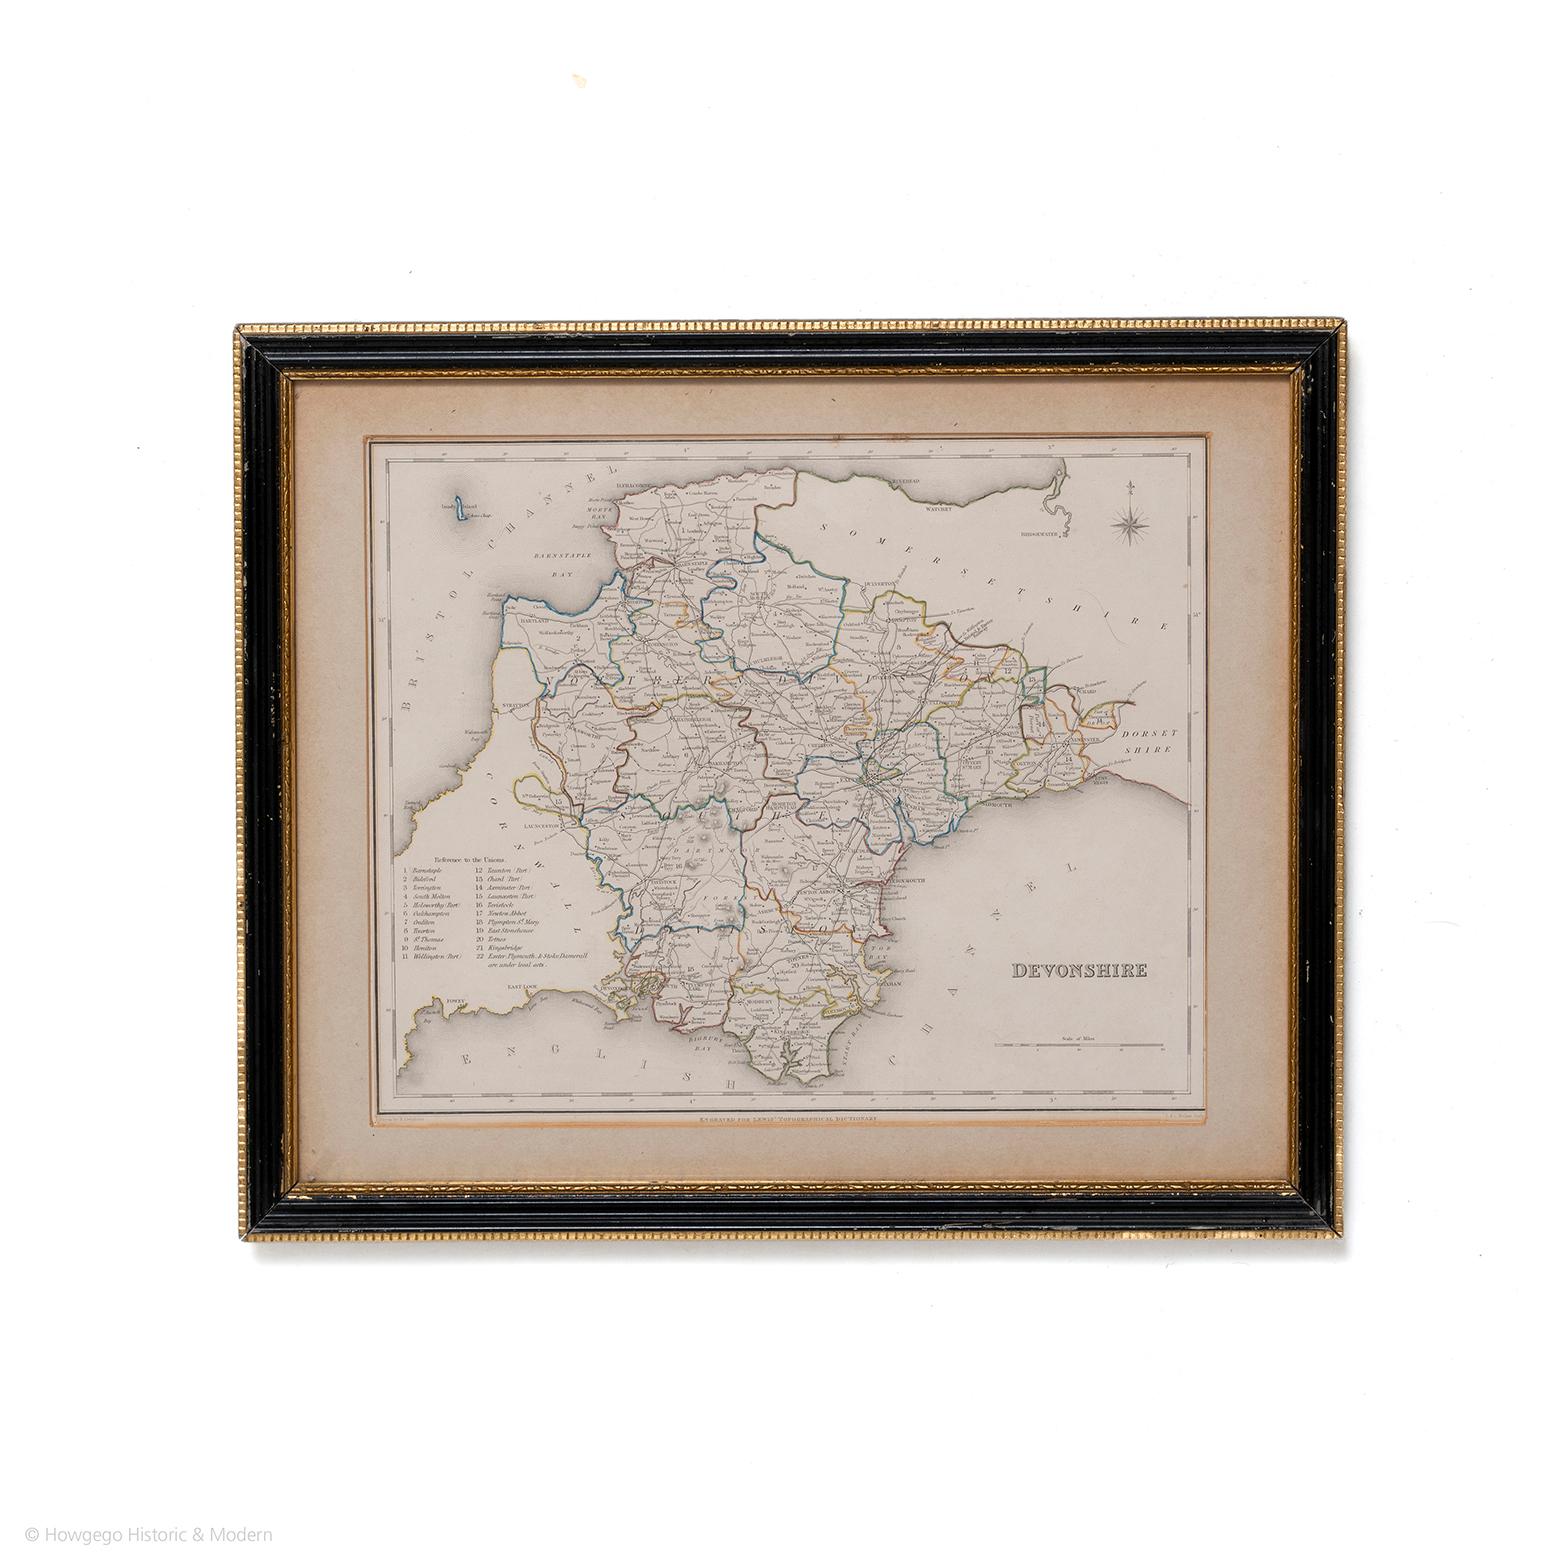 Devonshire drawn by Richard Creighton with reference to the Unions
Artist Richard Creighton
Engraved by J&C Walker Sculp
Published in Samuel Lewis Topographical Dictionary 1831, and there were a number or re-issues up to 1849. The county maps,